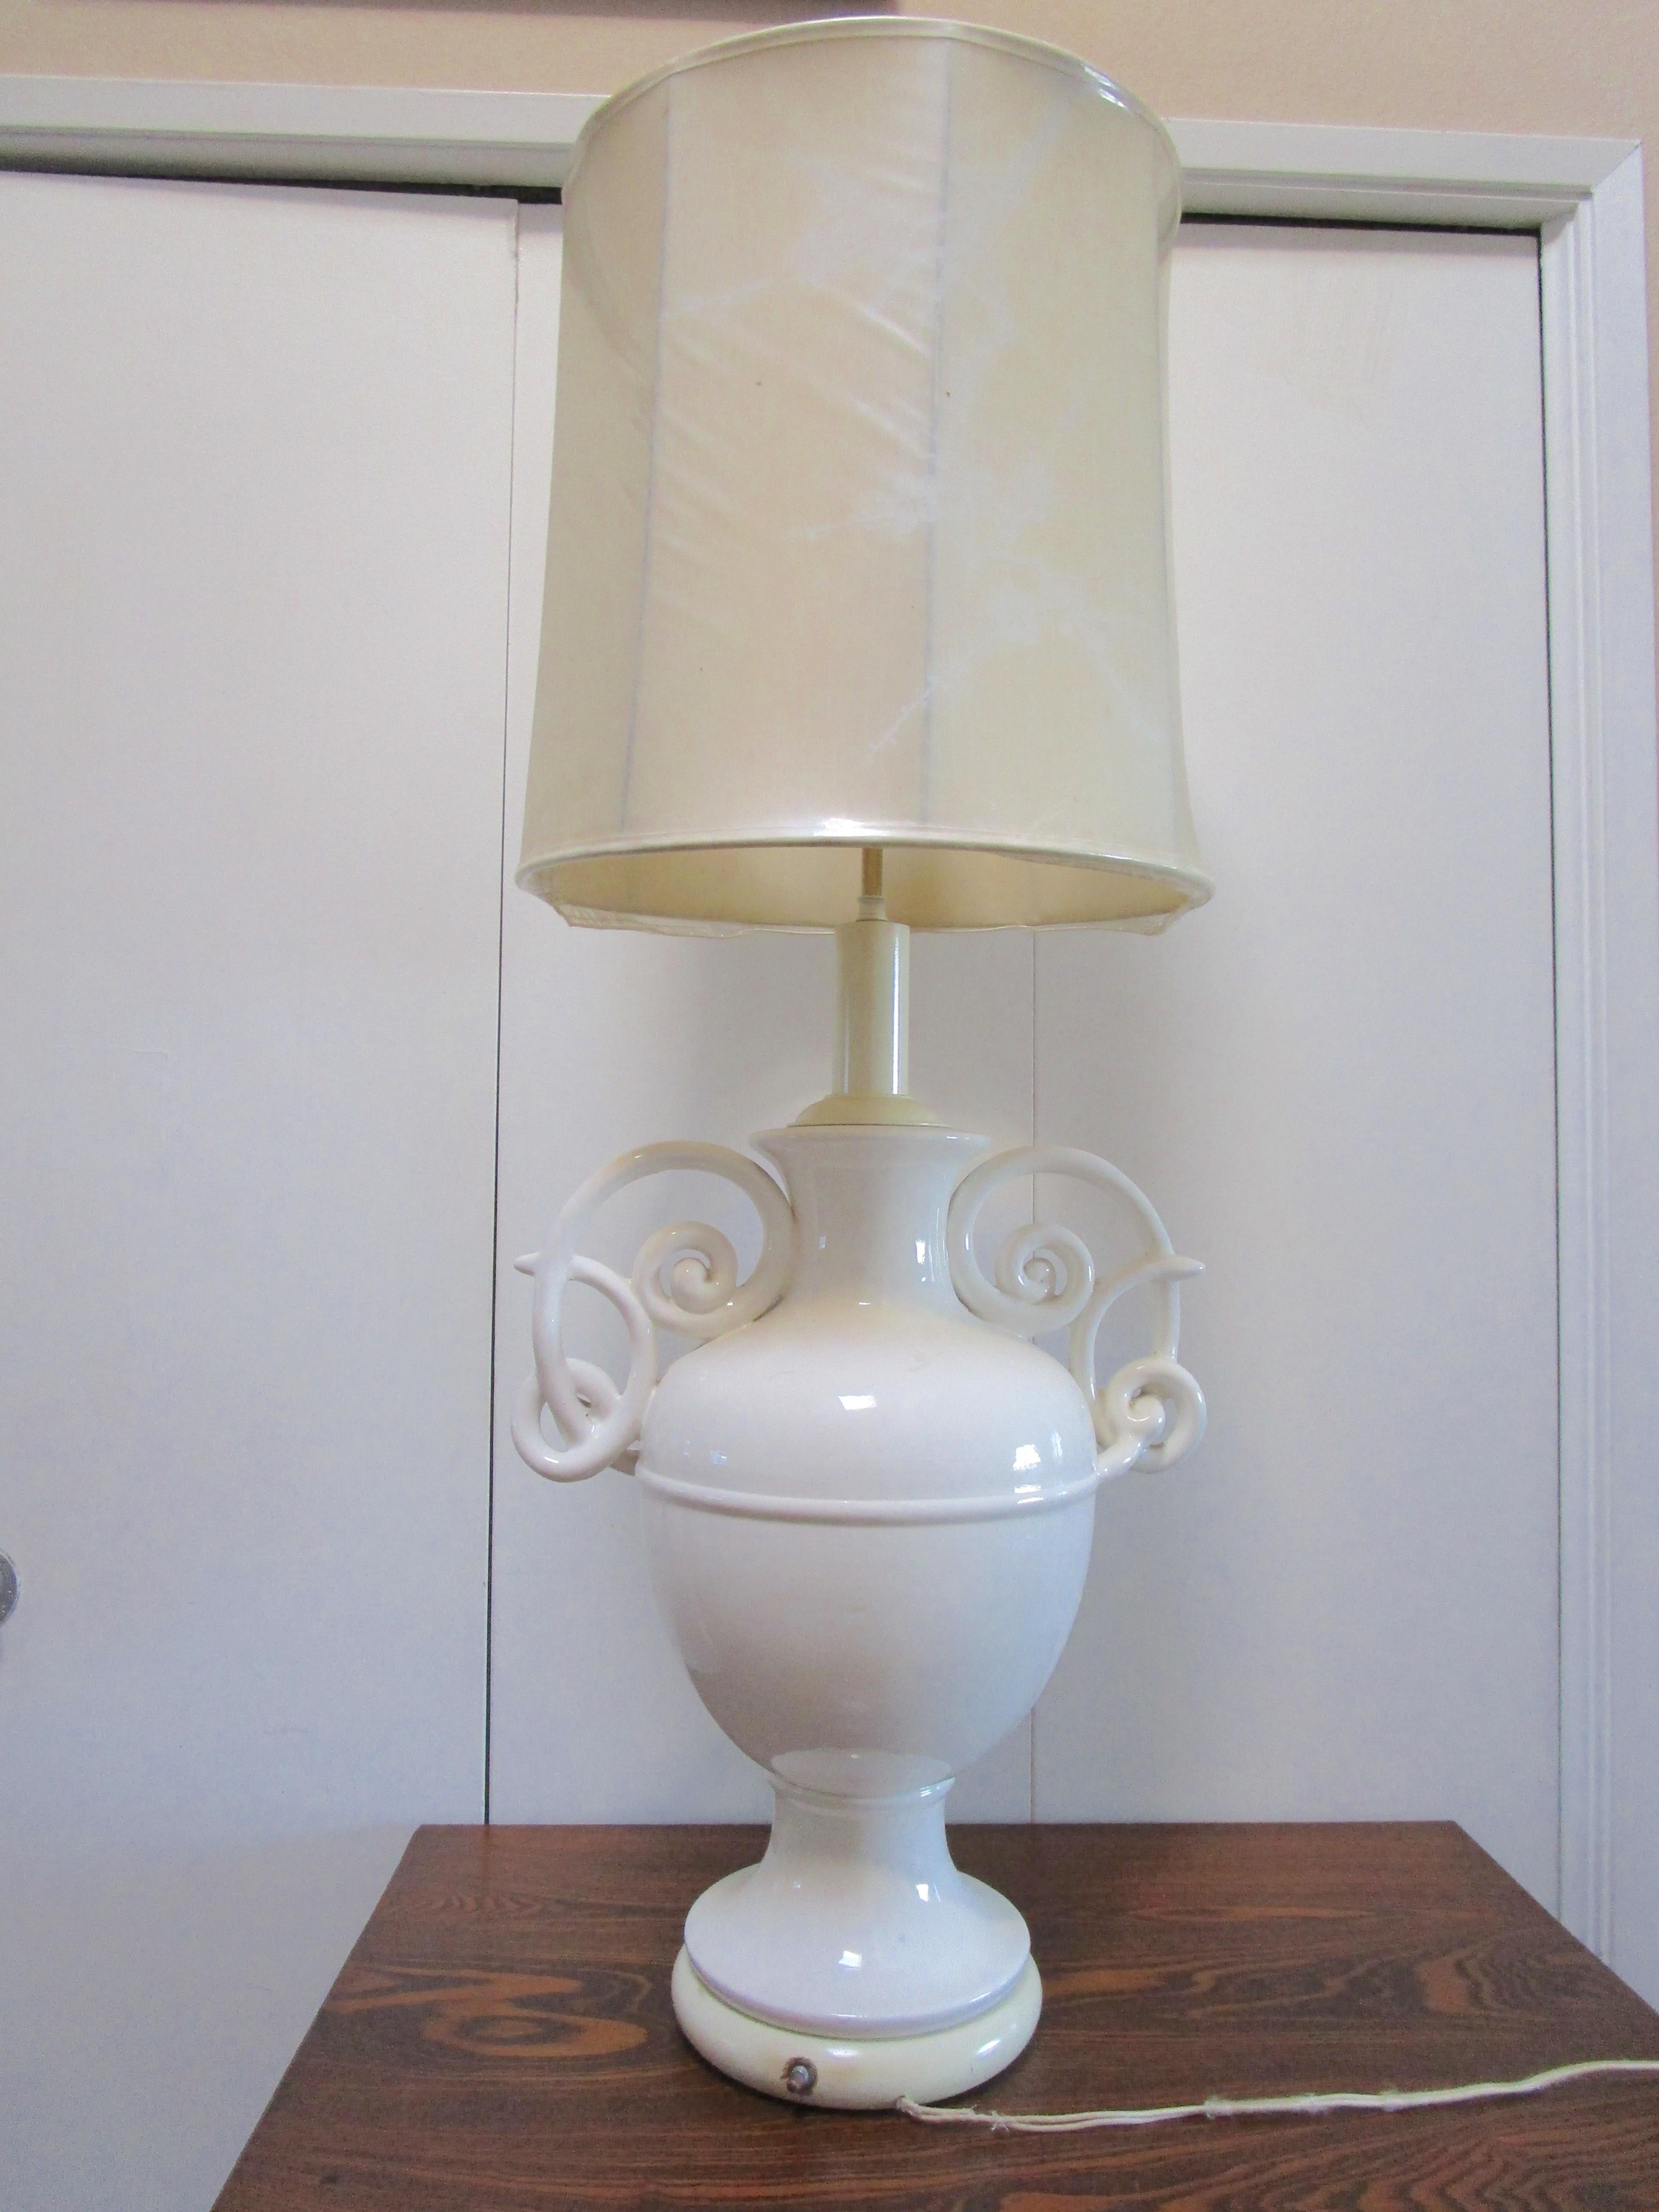 Monumental blanc de chine lamp is statuesque at 44 inches tall with dual sockets and a on / off switch at the base with the original silk cord. This piece exudes Art Nouveau form and style. But the lamp design is influenced by the designer